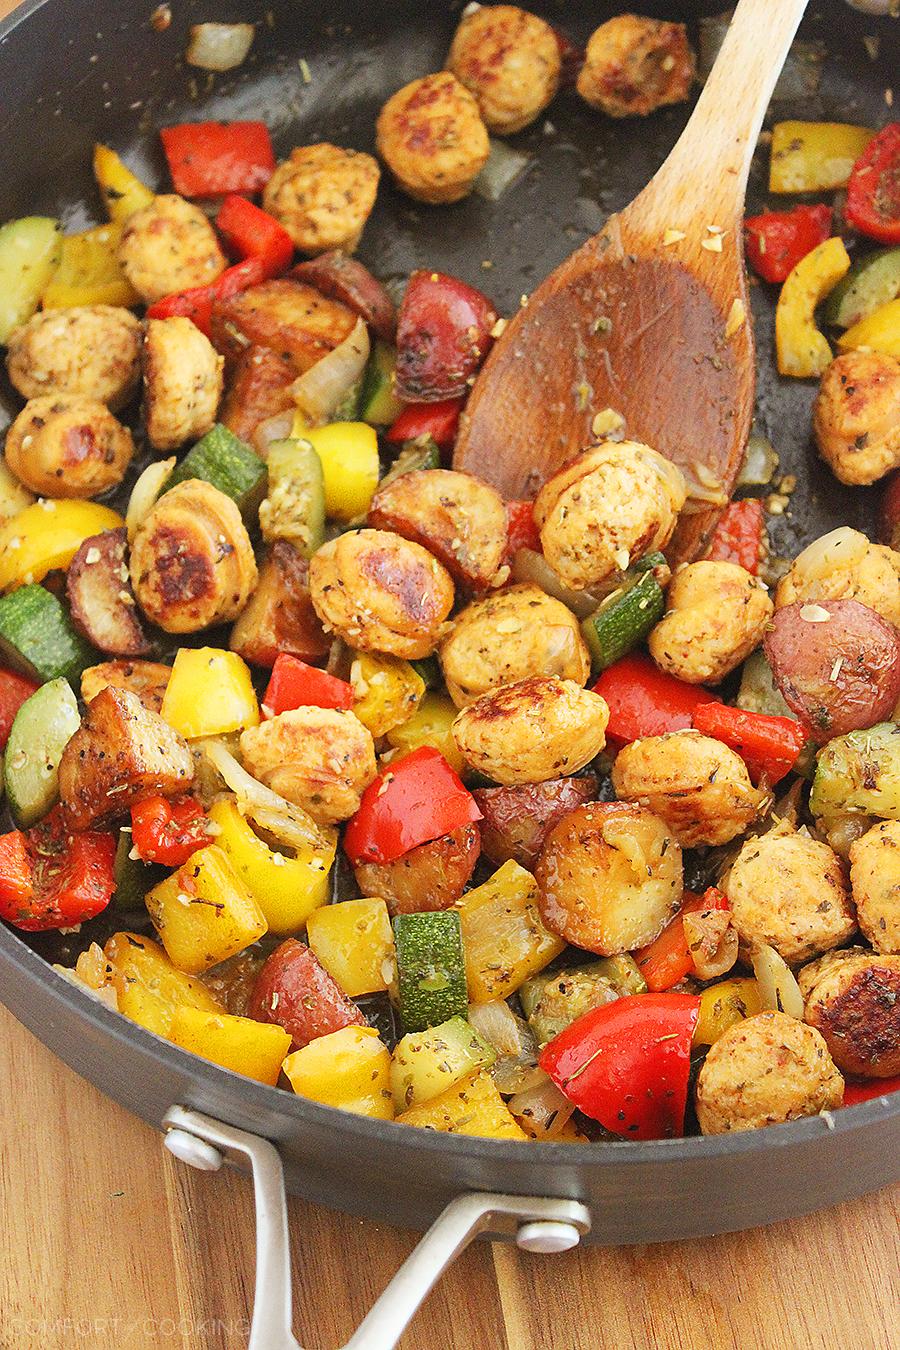 Summer Vegetable, Sausage and Potato Skillet – Sizzle up a skillet full of healthy, delicious goodness with summer vegetables, potatoes and chicken sausage! It's one of our favorite easy weeknight meals. | thecomfortofcooking.com